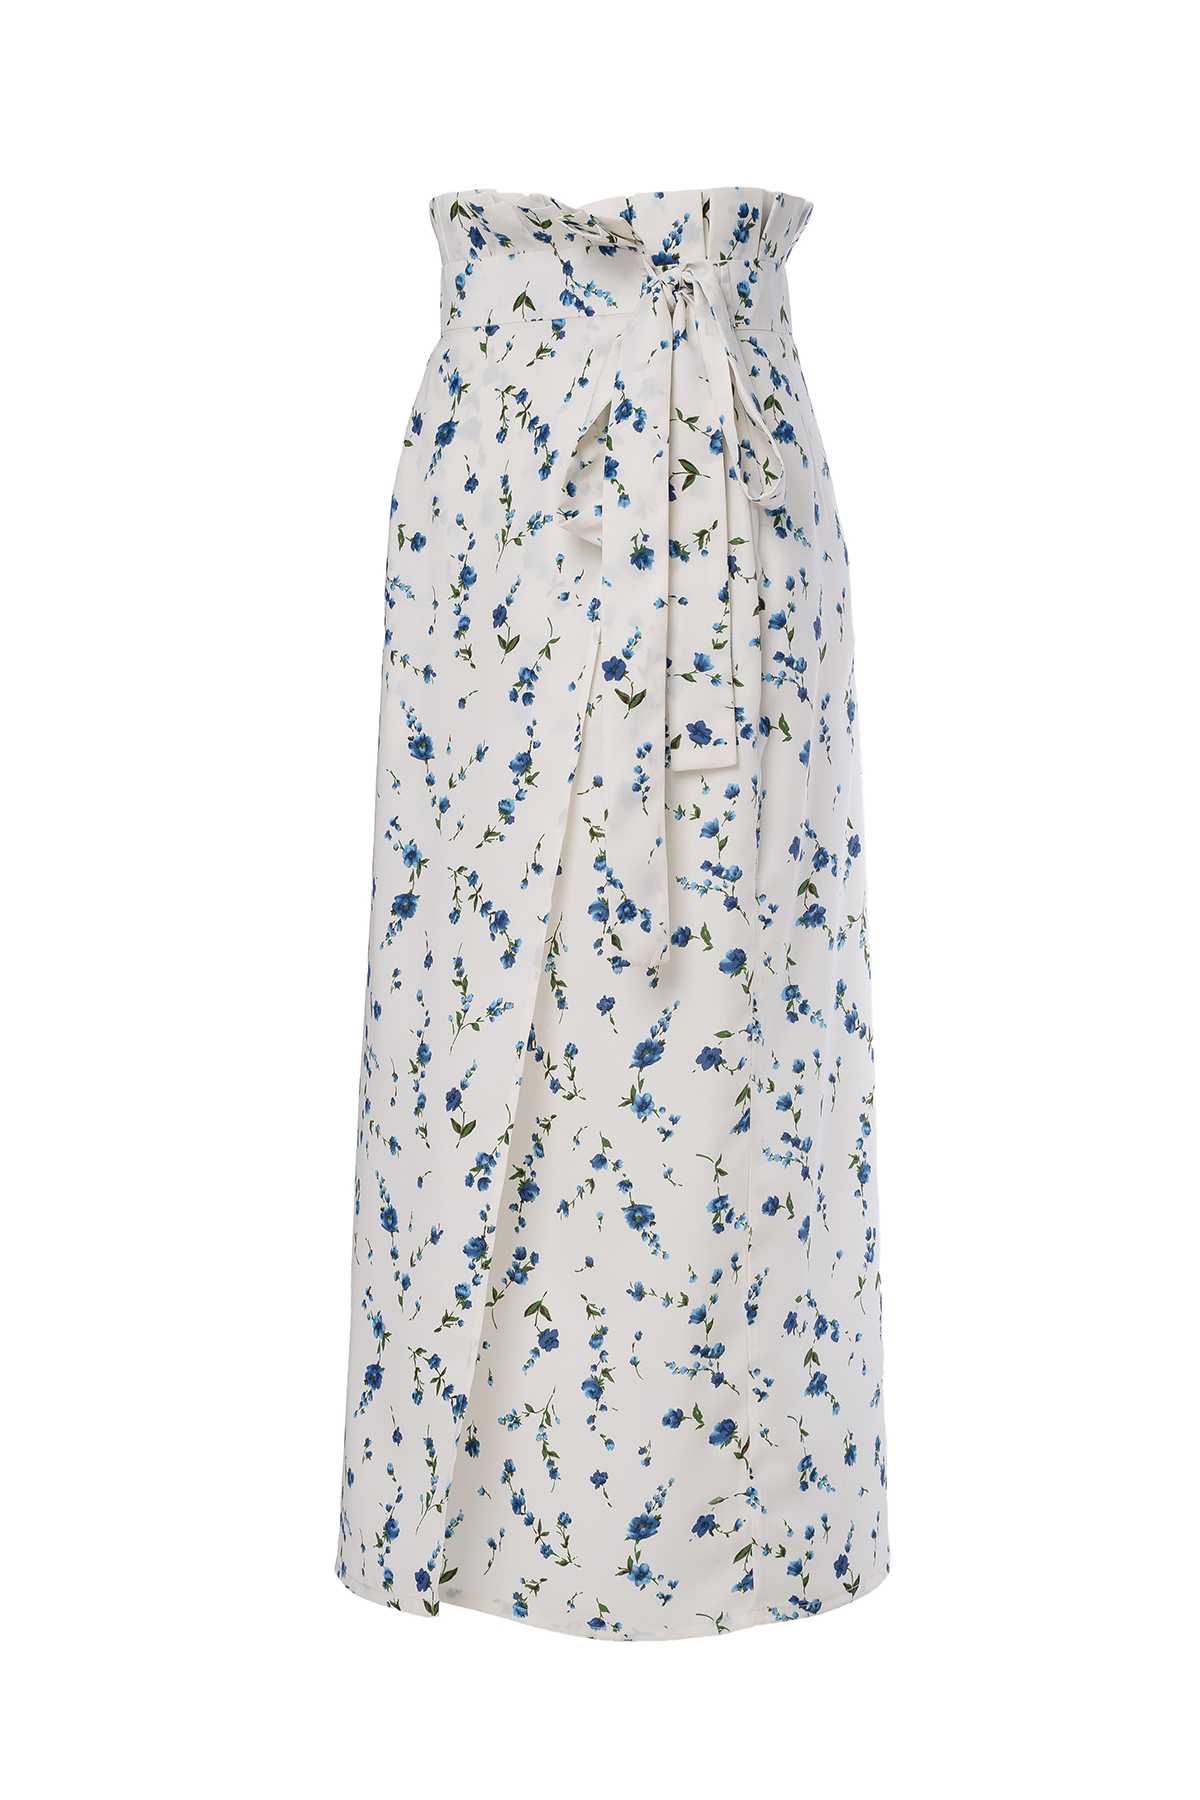 White Wrap Skirt with Floral Pattern